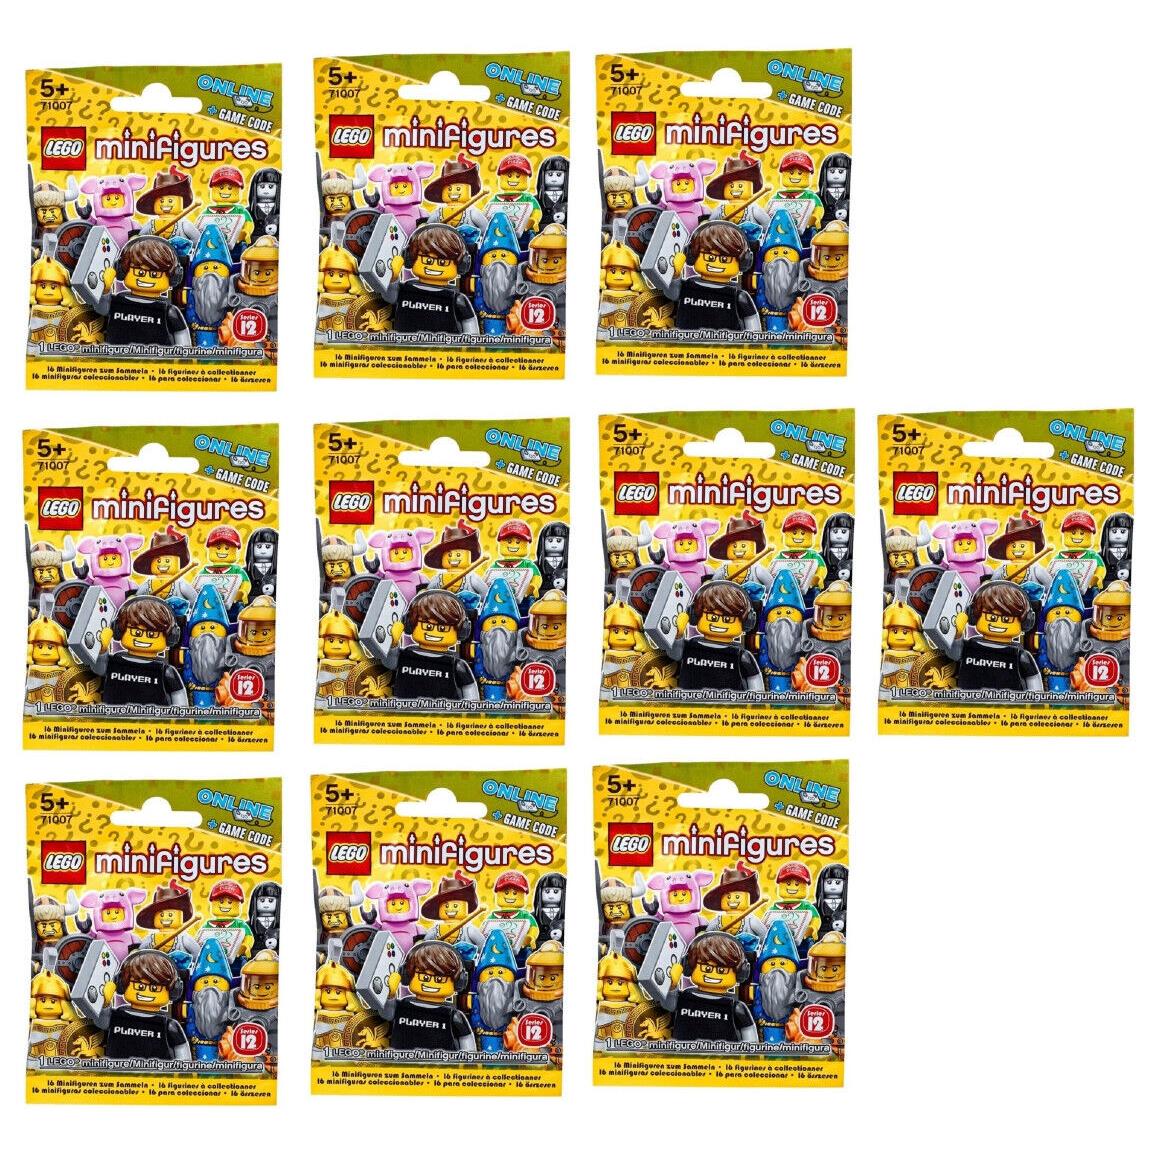 10 Packs/bags Lego 71007 Minifigures Series 12 Blind Unsorted